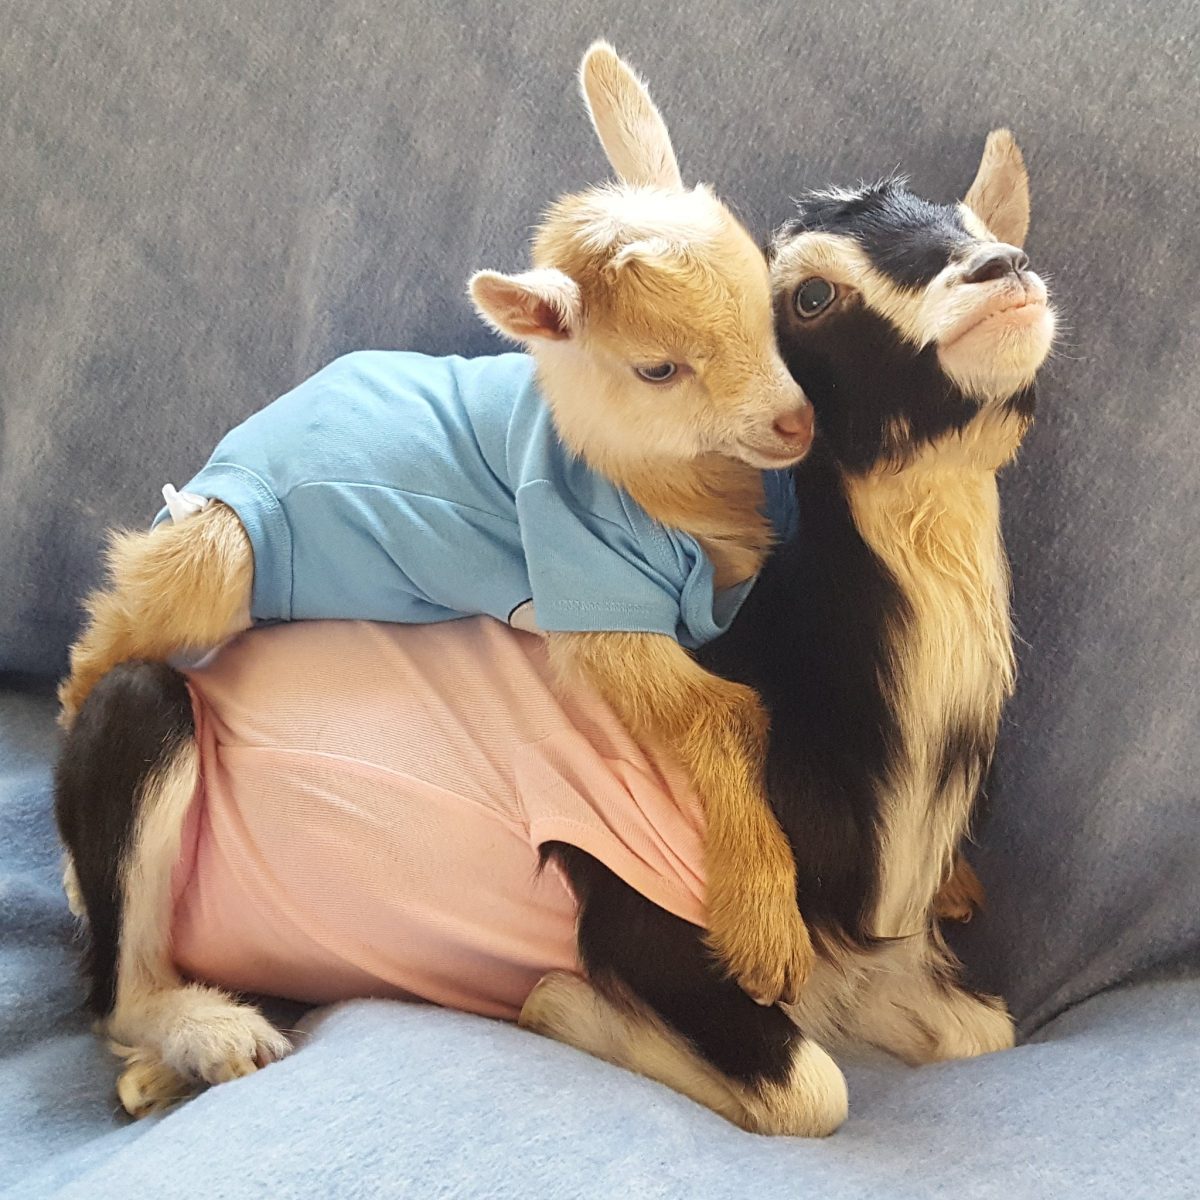 Pocket Resting on Polly - Source: Twitter/Goats of Anarchy